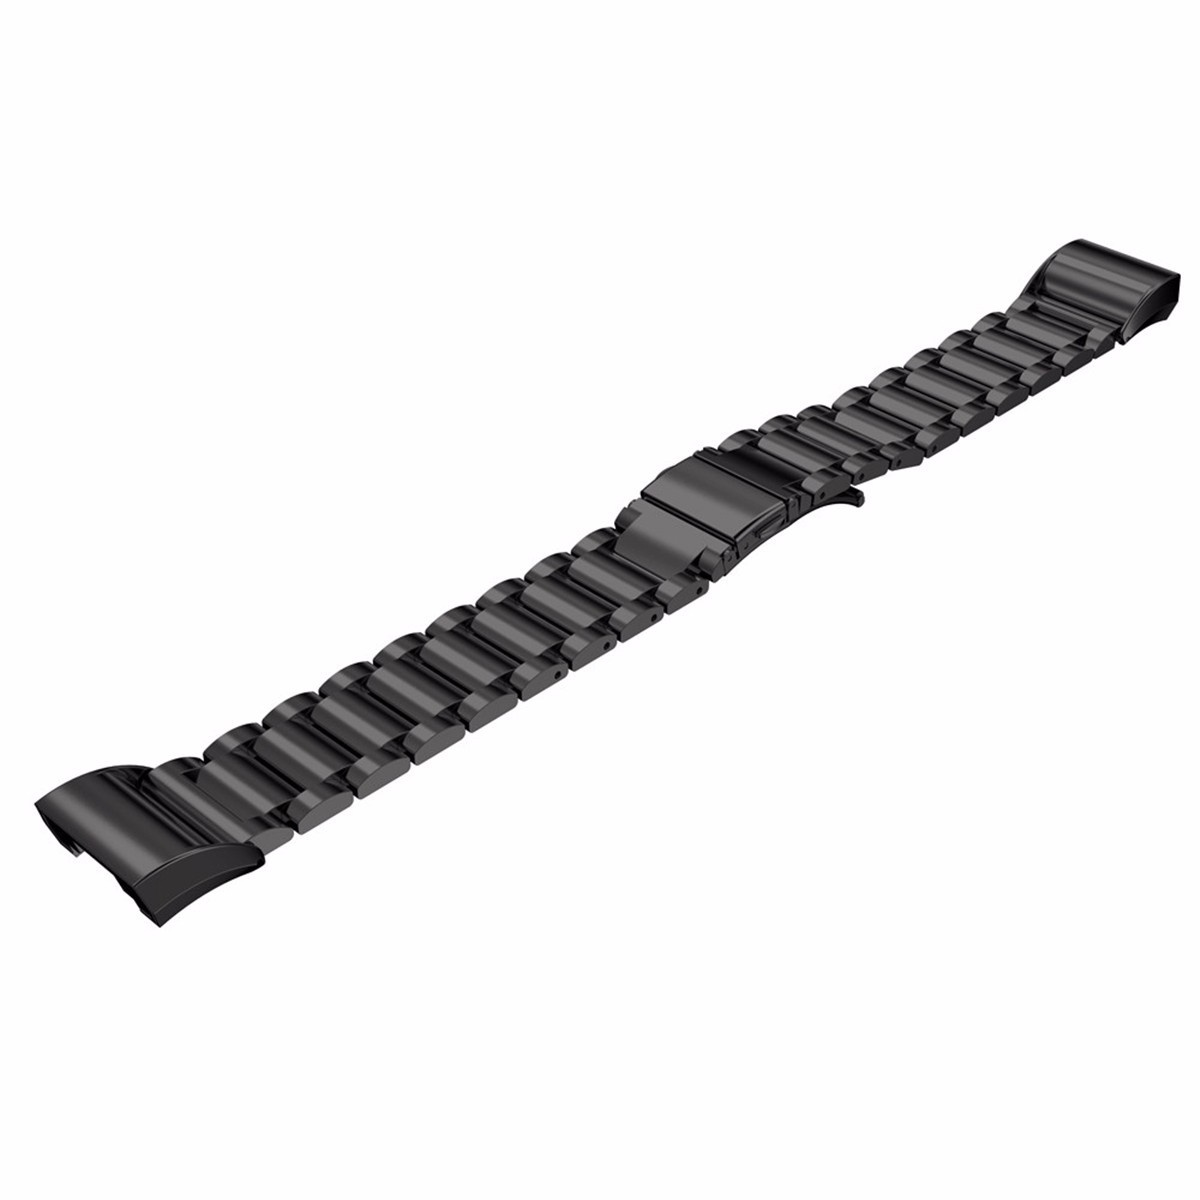 Classy-Replacement-Strap-For-Fitbit-Charge-2-Tracker-Stainless-Steel-Bracelet-Wristband-1149865